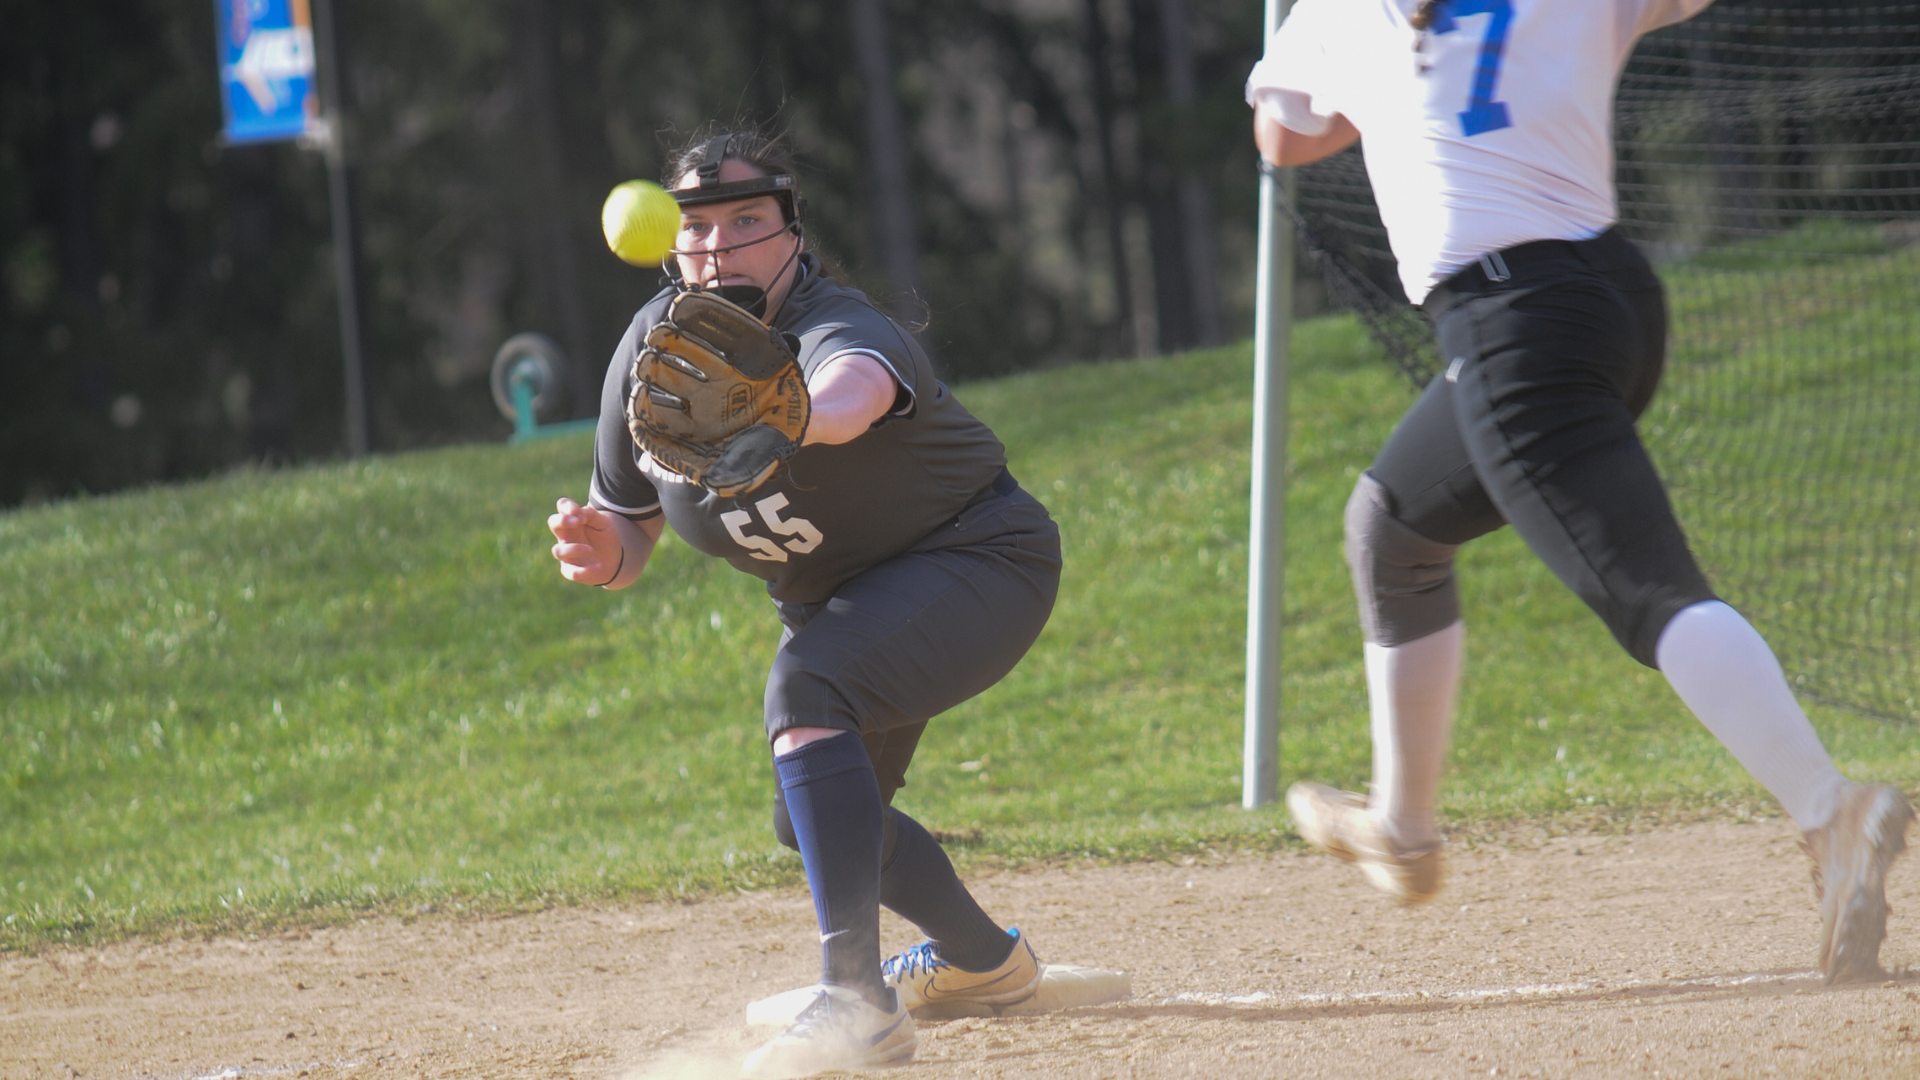 Sarah Fastenau makes a play at 1st base at Clarks Summit University Wednesday afternoon.